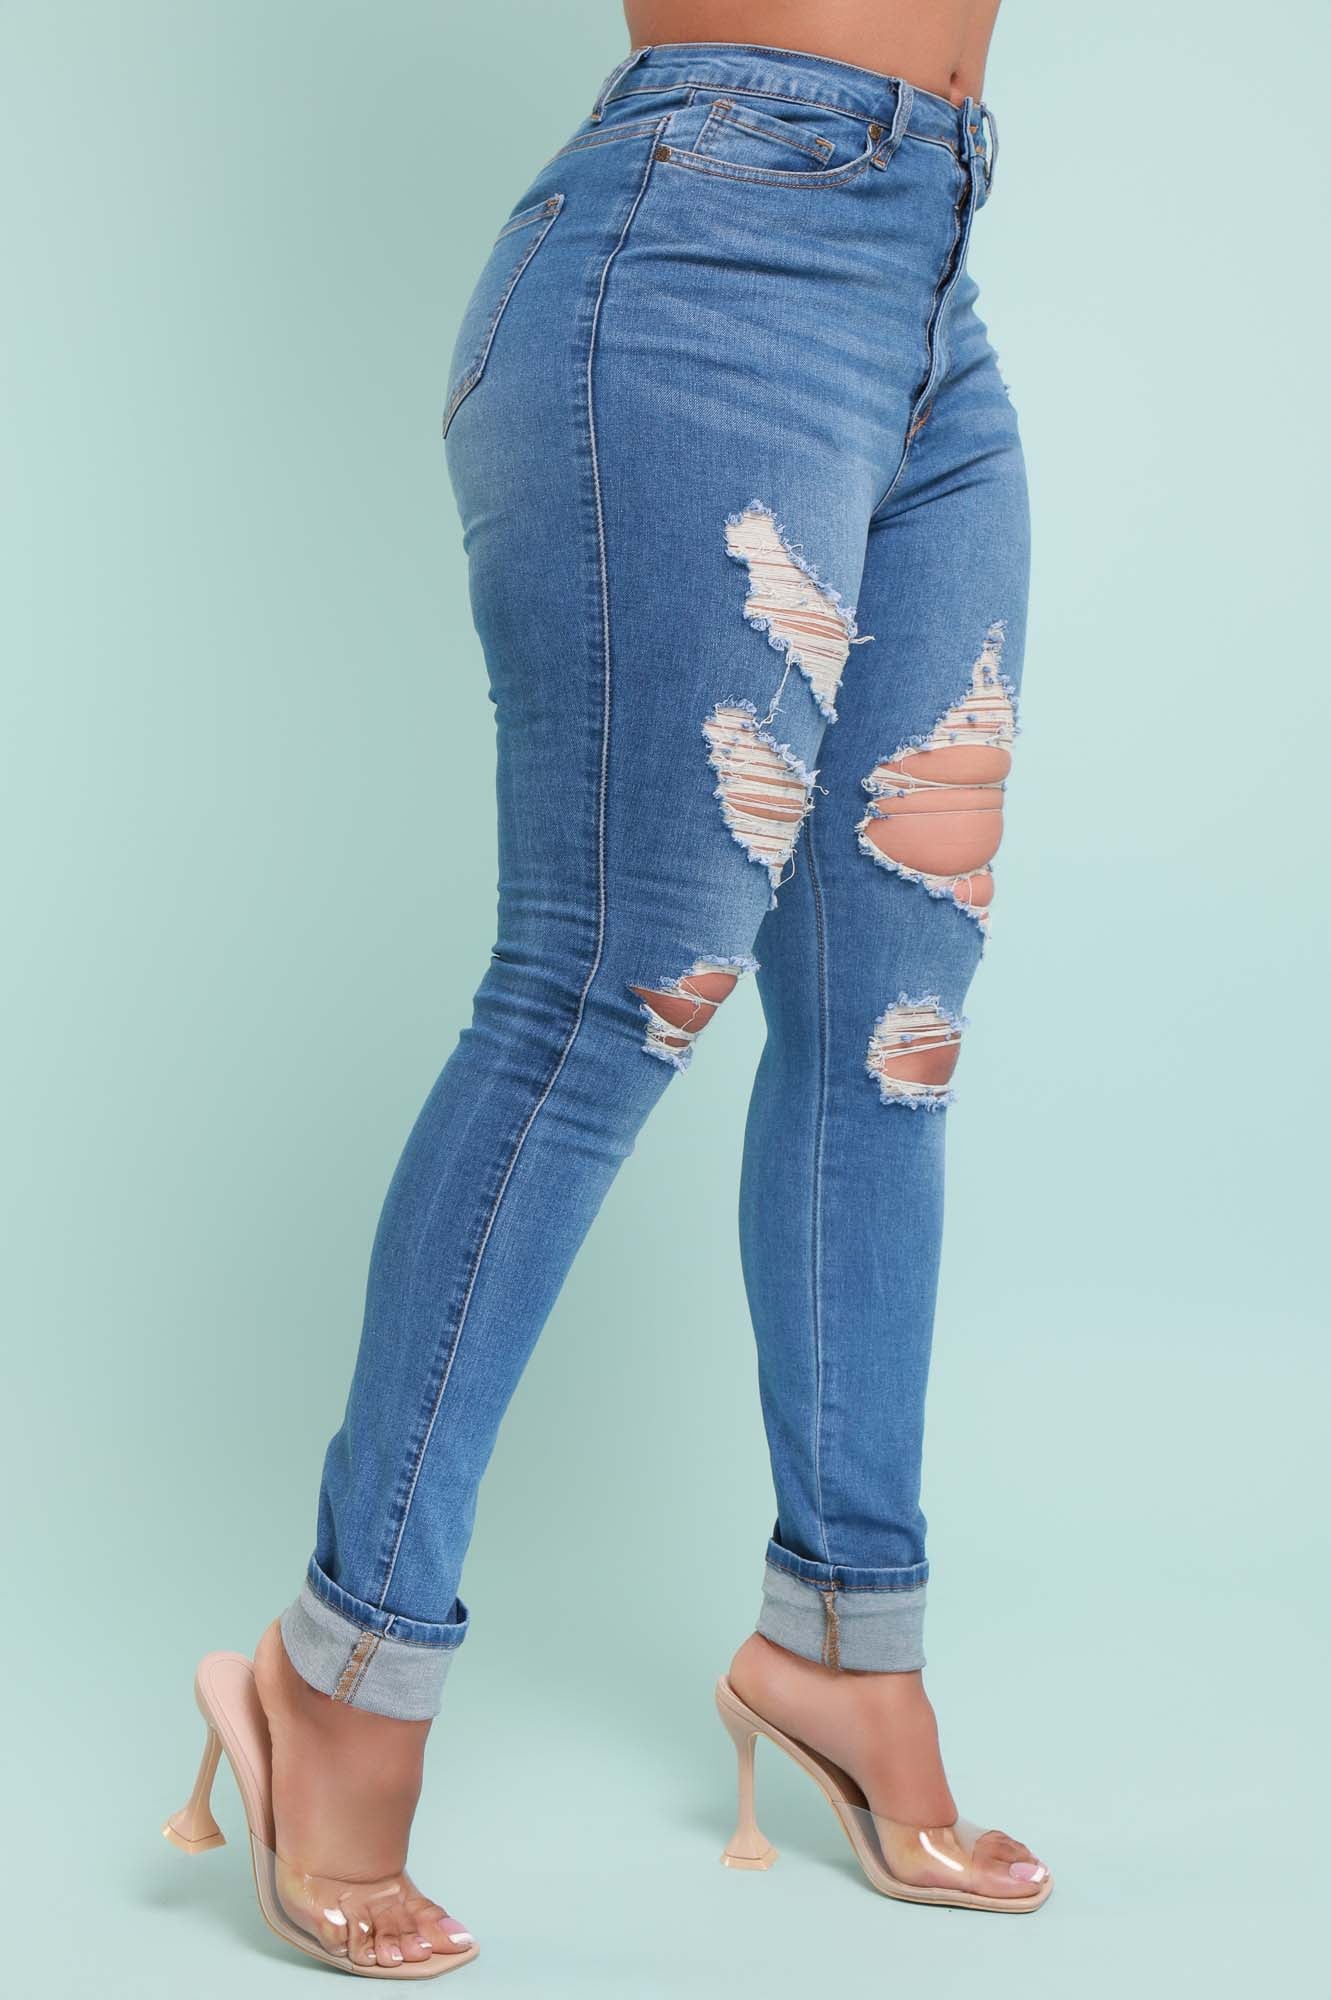 Don't Blame Me High Rise Distressed Hourglass Stretchy Jeans - Medium Wash - Swank A Posh